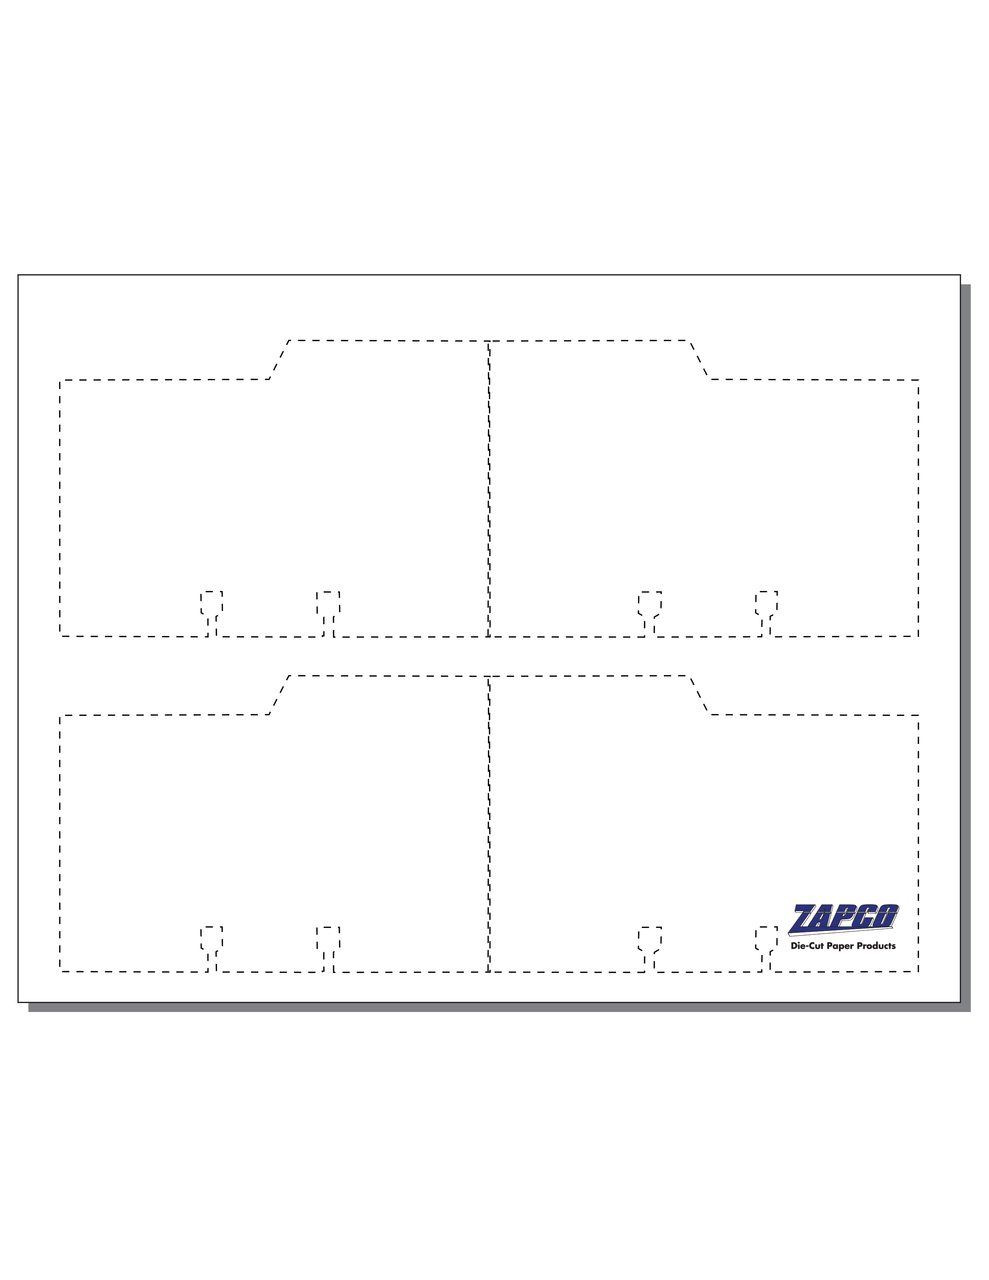 Item 120: 4-Up 3" x 5" File Card Rotary Paper Left and Right Tab 8 1/2" x 11" Sheet (250 Sheets)